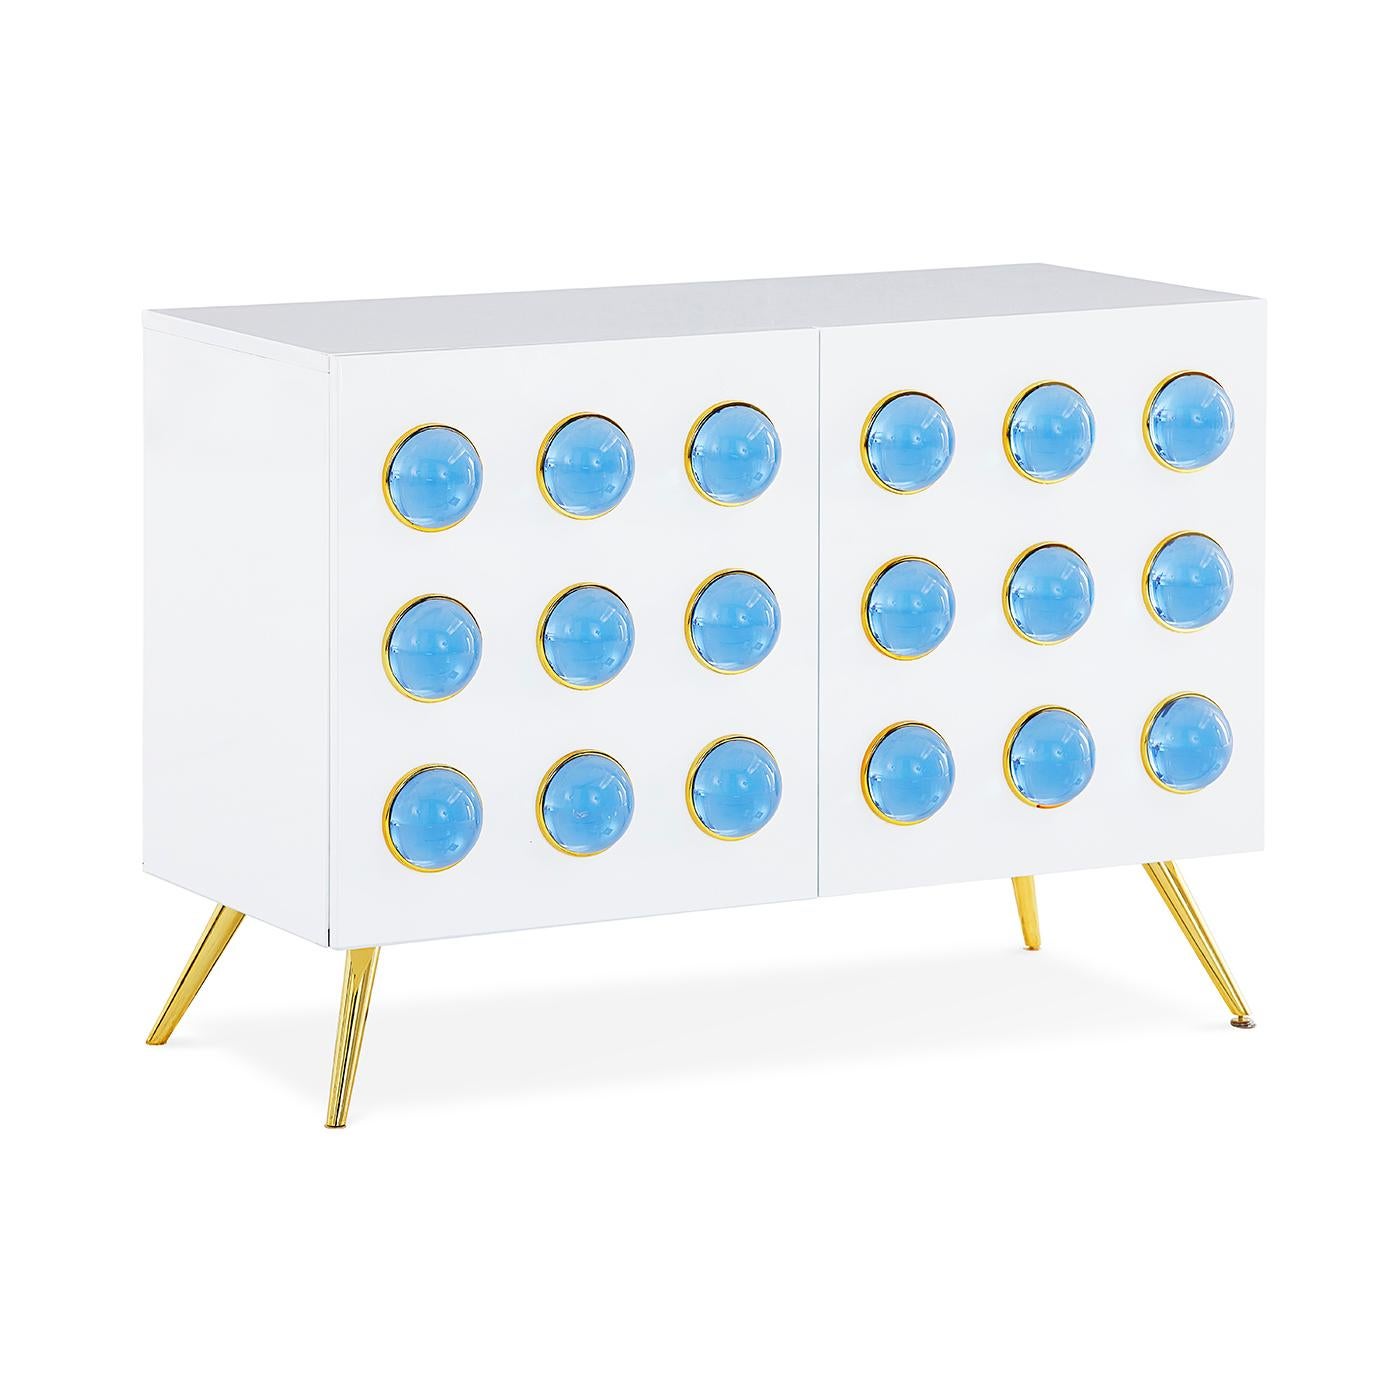 Futuristic elegance. A glossy, white lacquer cabinet featuring two front doors capped with blue solid acrylic cabochons. Tapered brass legs give it an elegant edge. Guaranteed to deliver mega glamour while you stash your stuff.

Specs:
White,